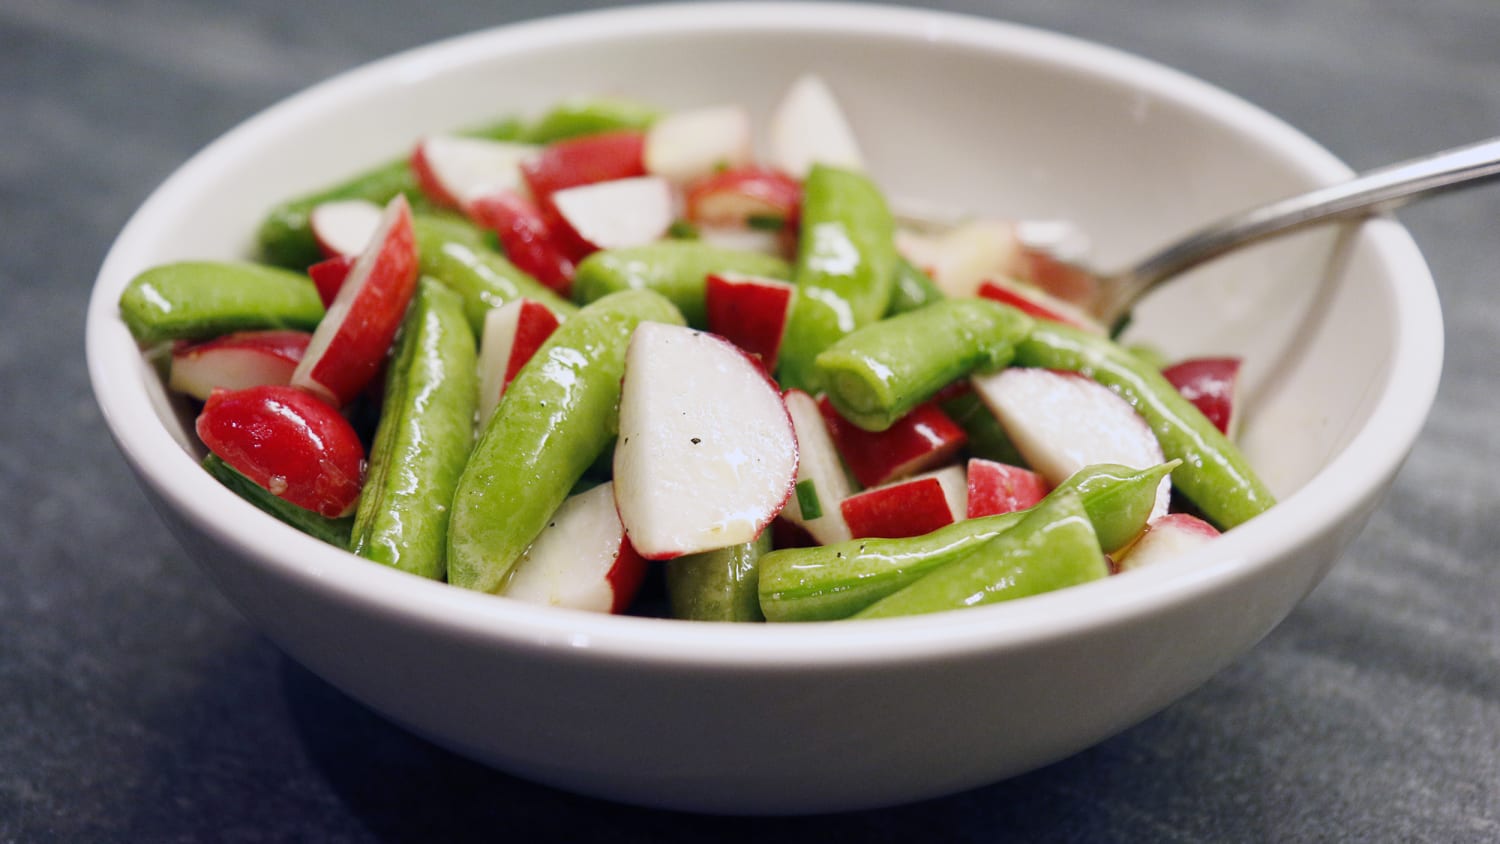 Best Snap Pea Salad Recipe - How to Make Garlicky Spring Salad